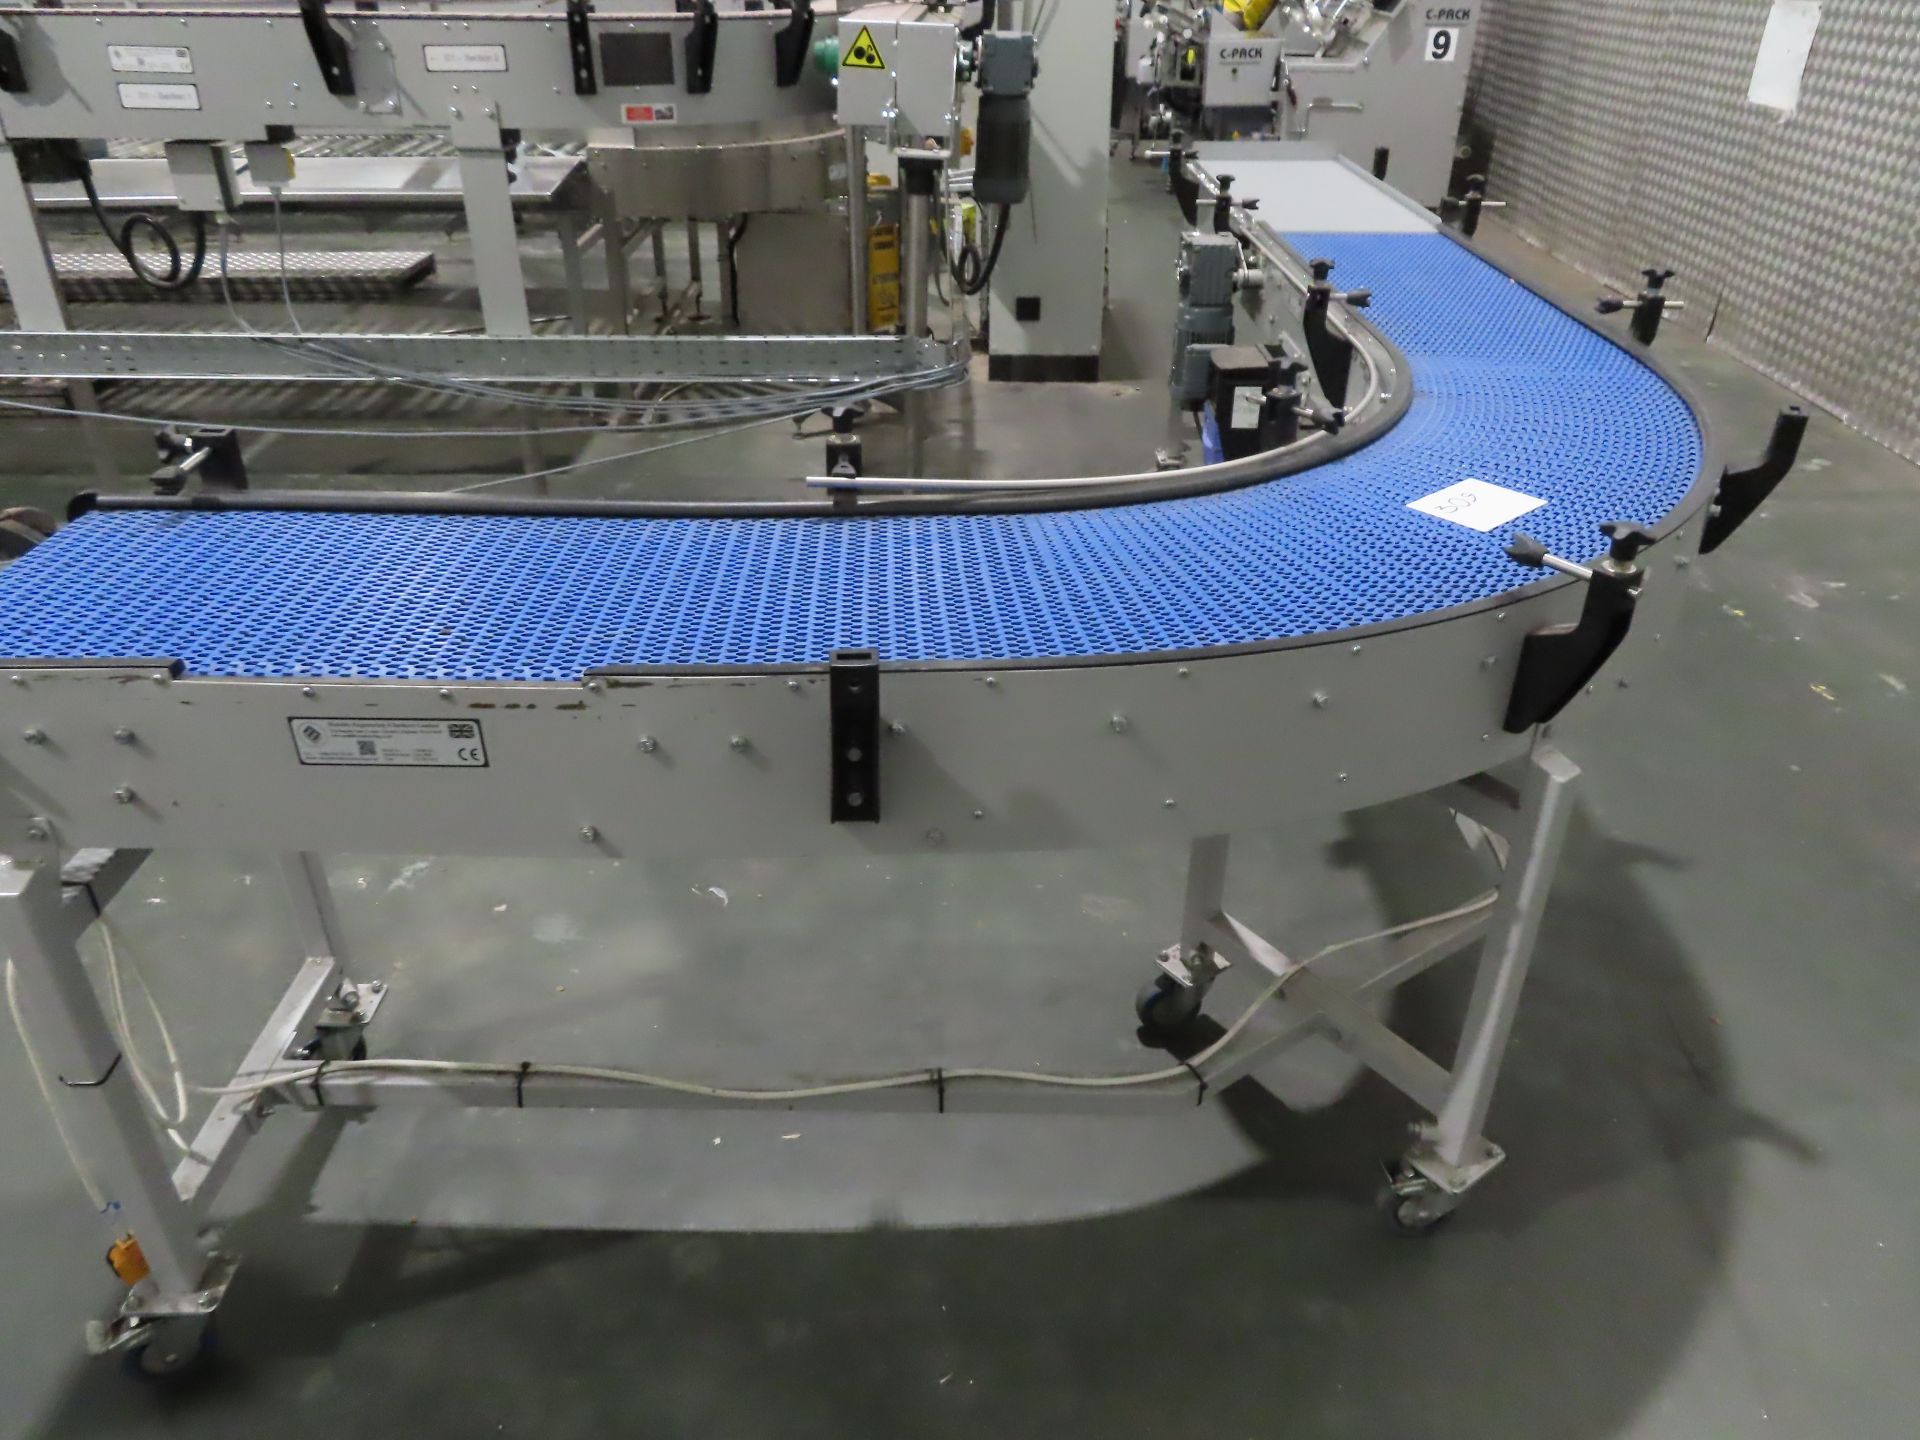 MOBILITY ENGINEERING RIGHT ANGLED CONVEYOR YEAR 2020